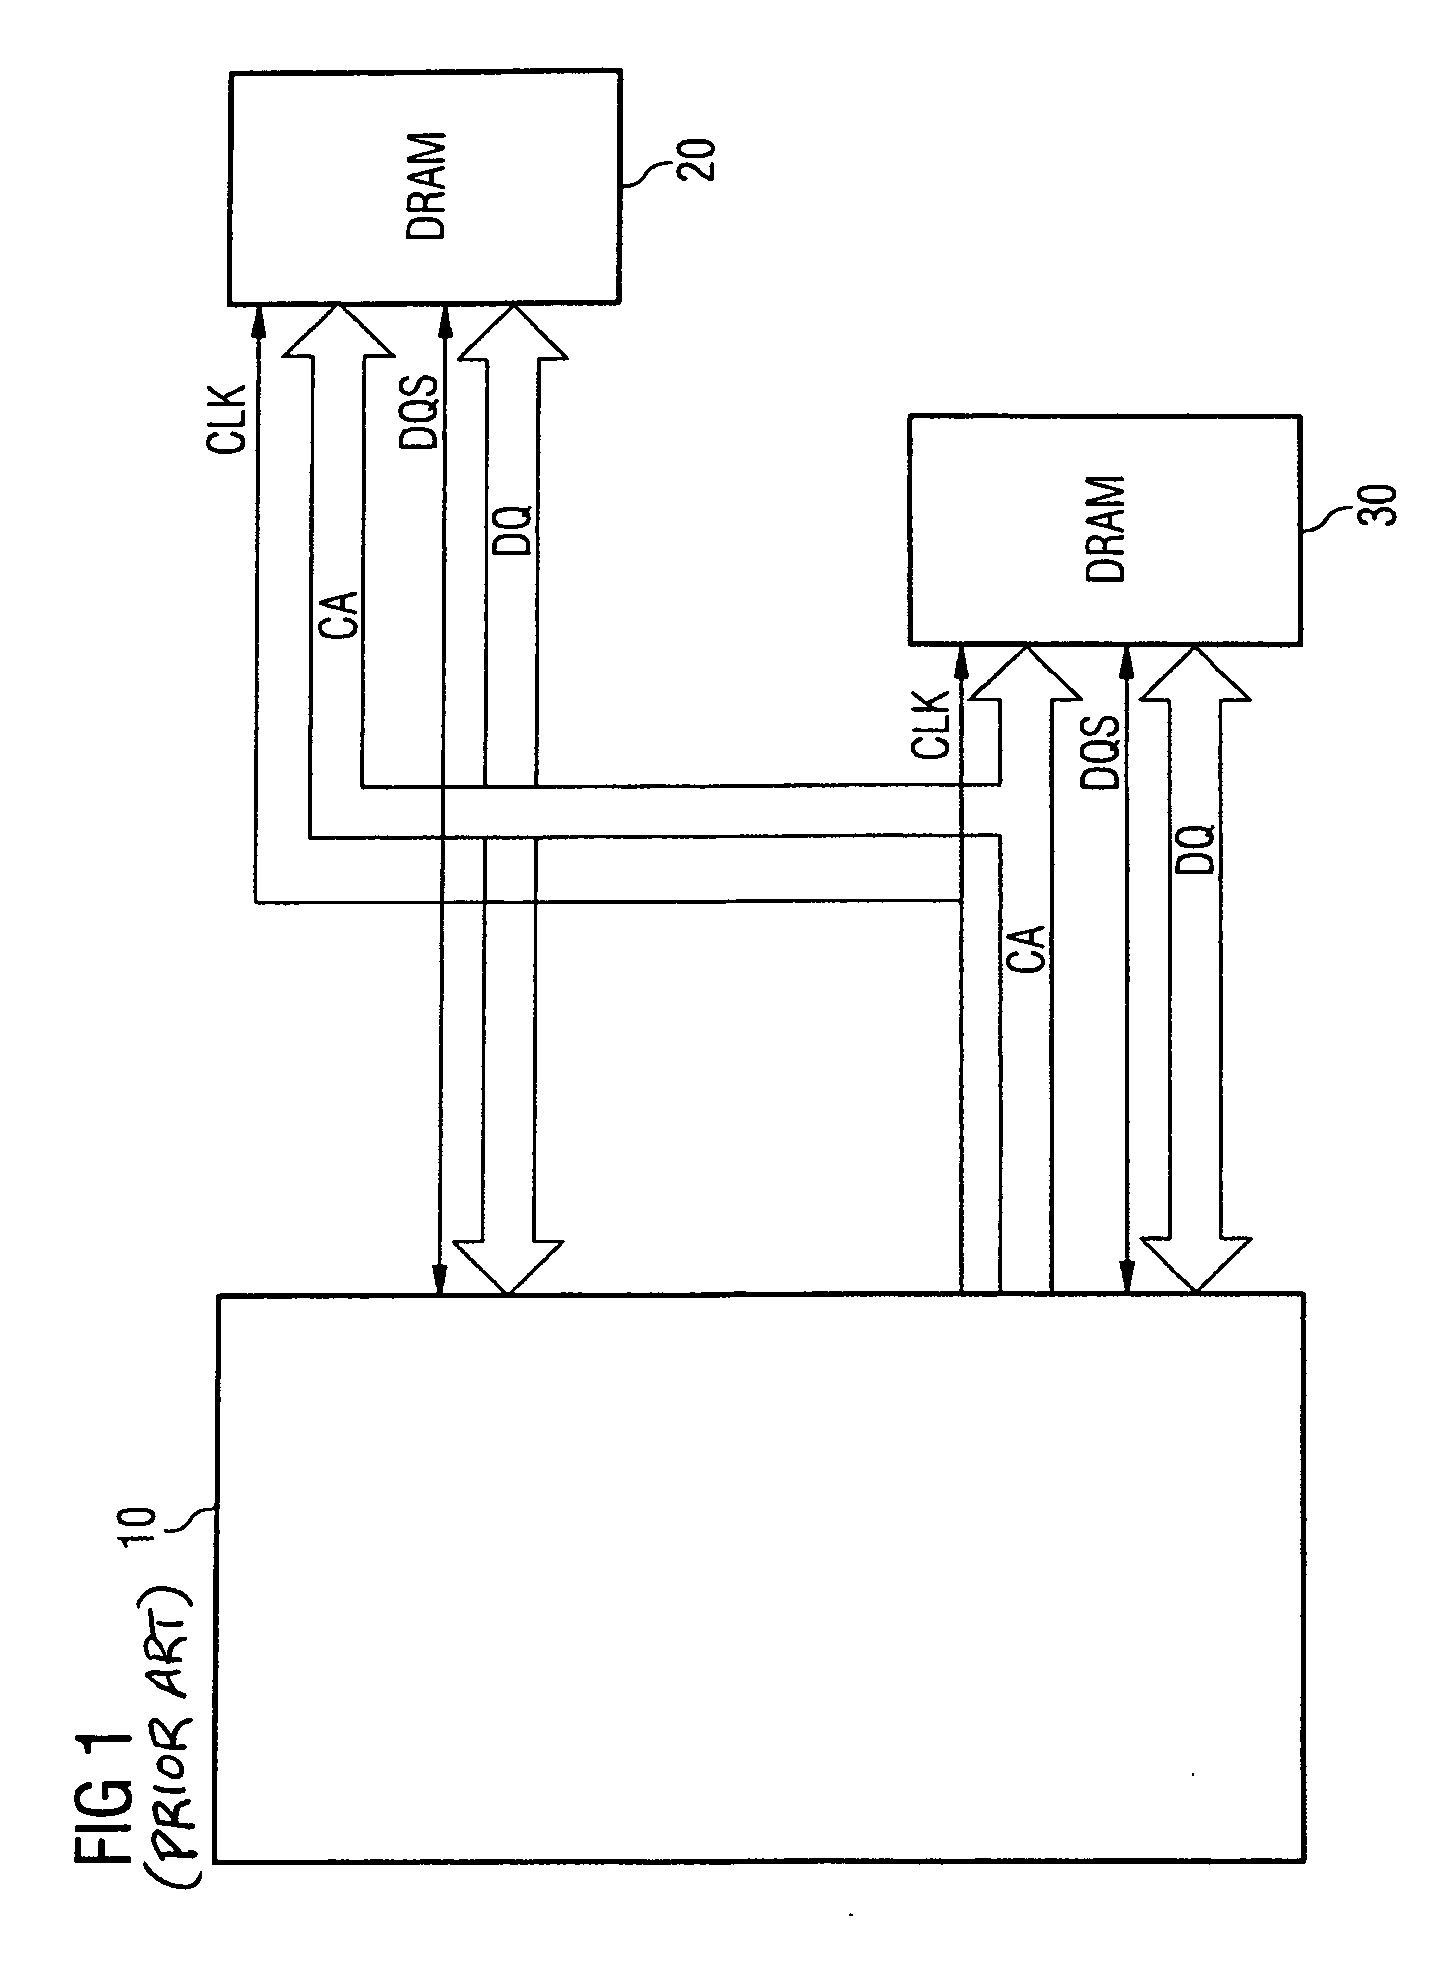 Memory control module and method for operating a memory control module